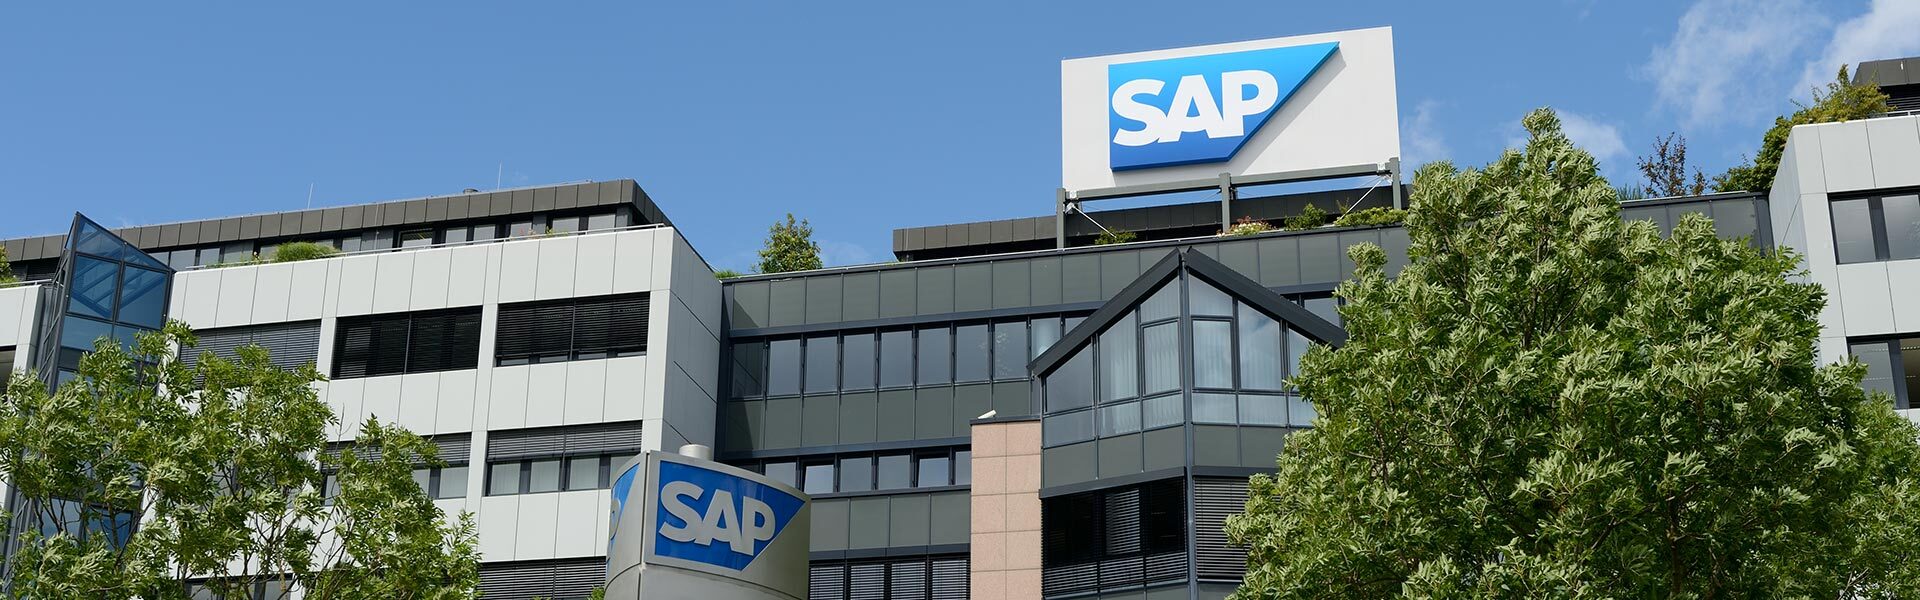 SAP reveals increasing Indonesian investment in sustainability solutions driven by competitiveness and profitability benefits